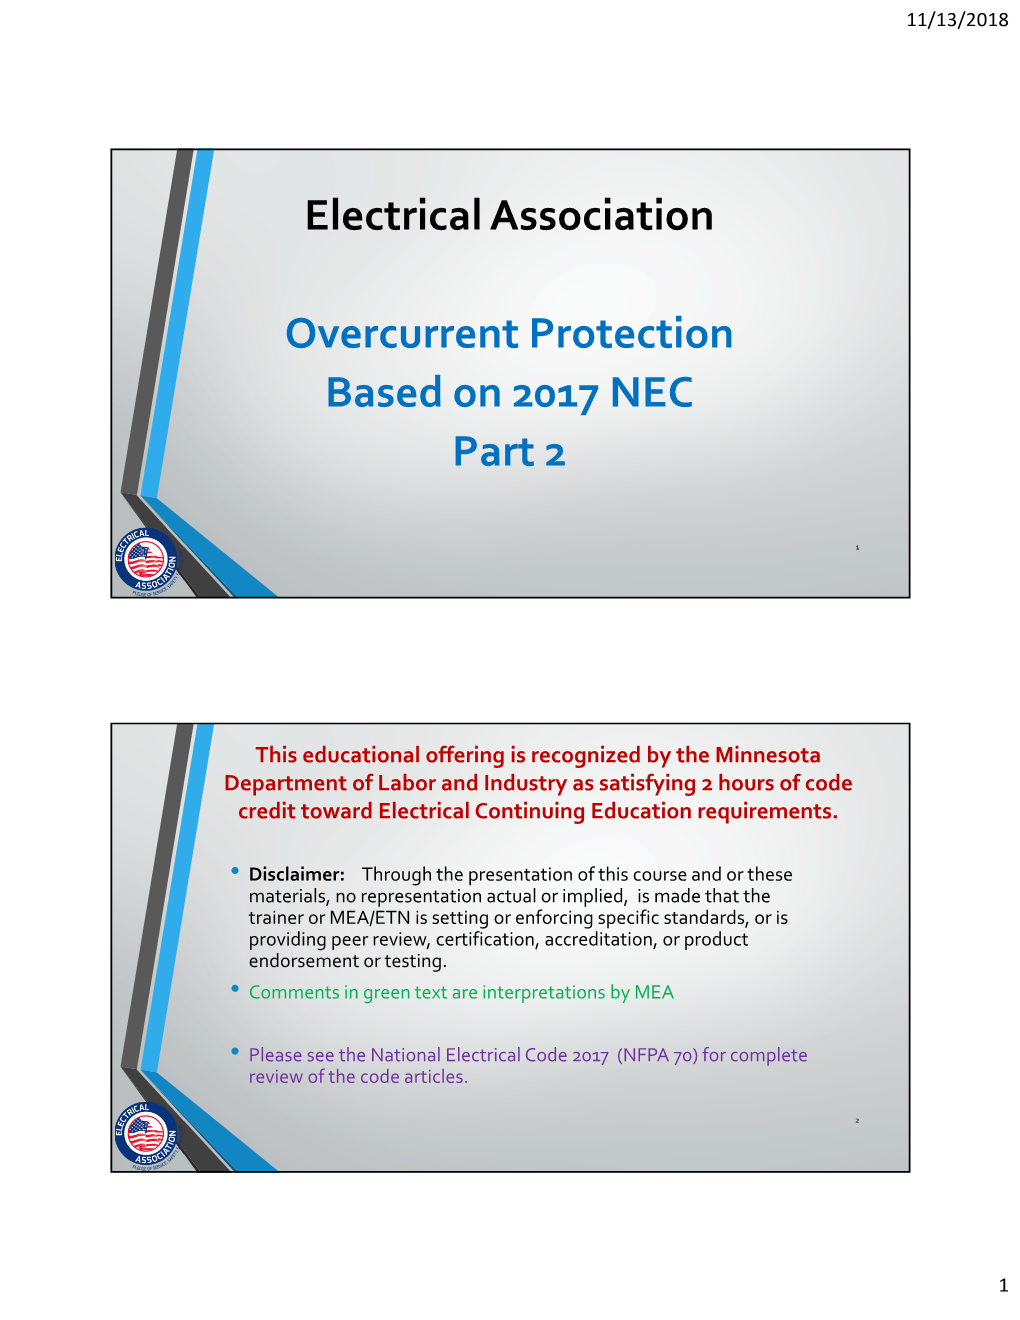 Electrical Association Overcurrent Protection Based on 2017 NEC Part 2